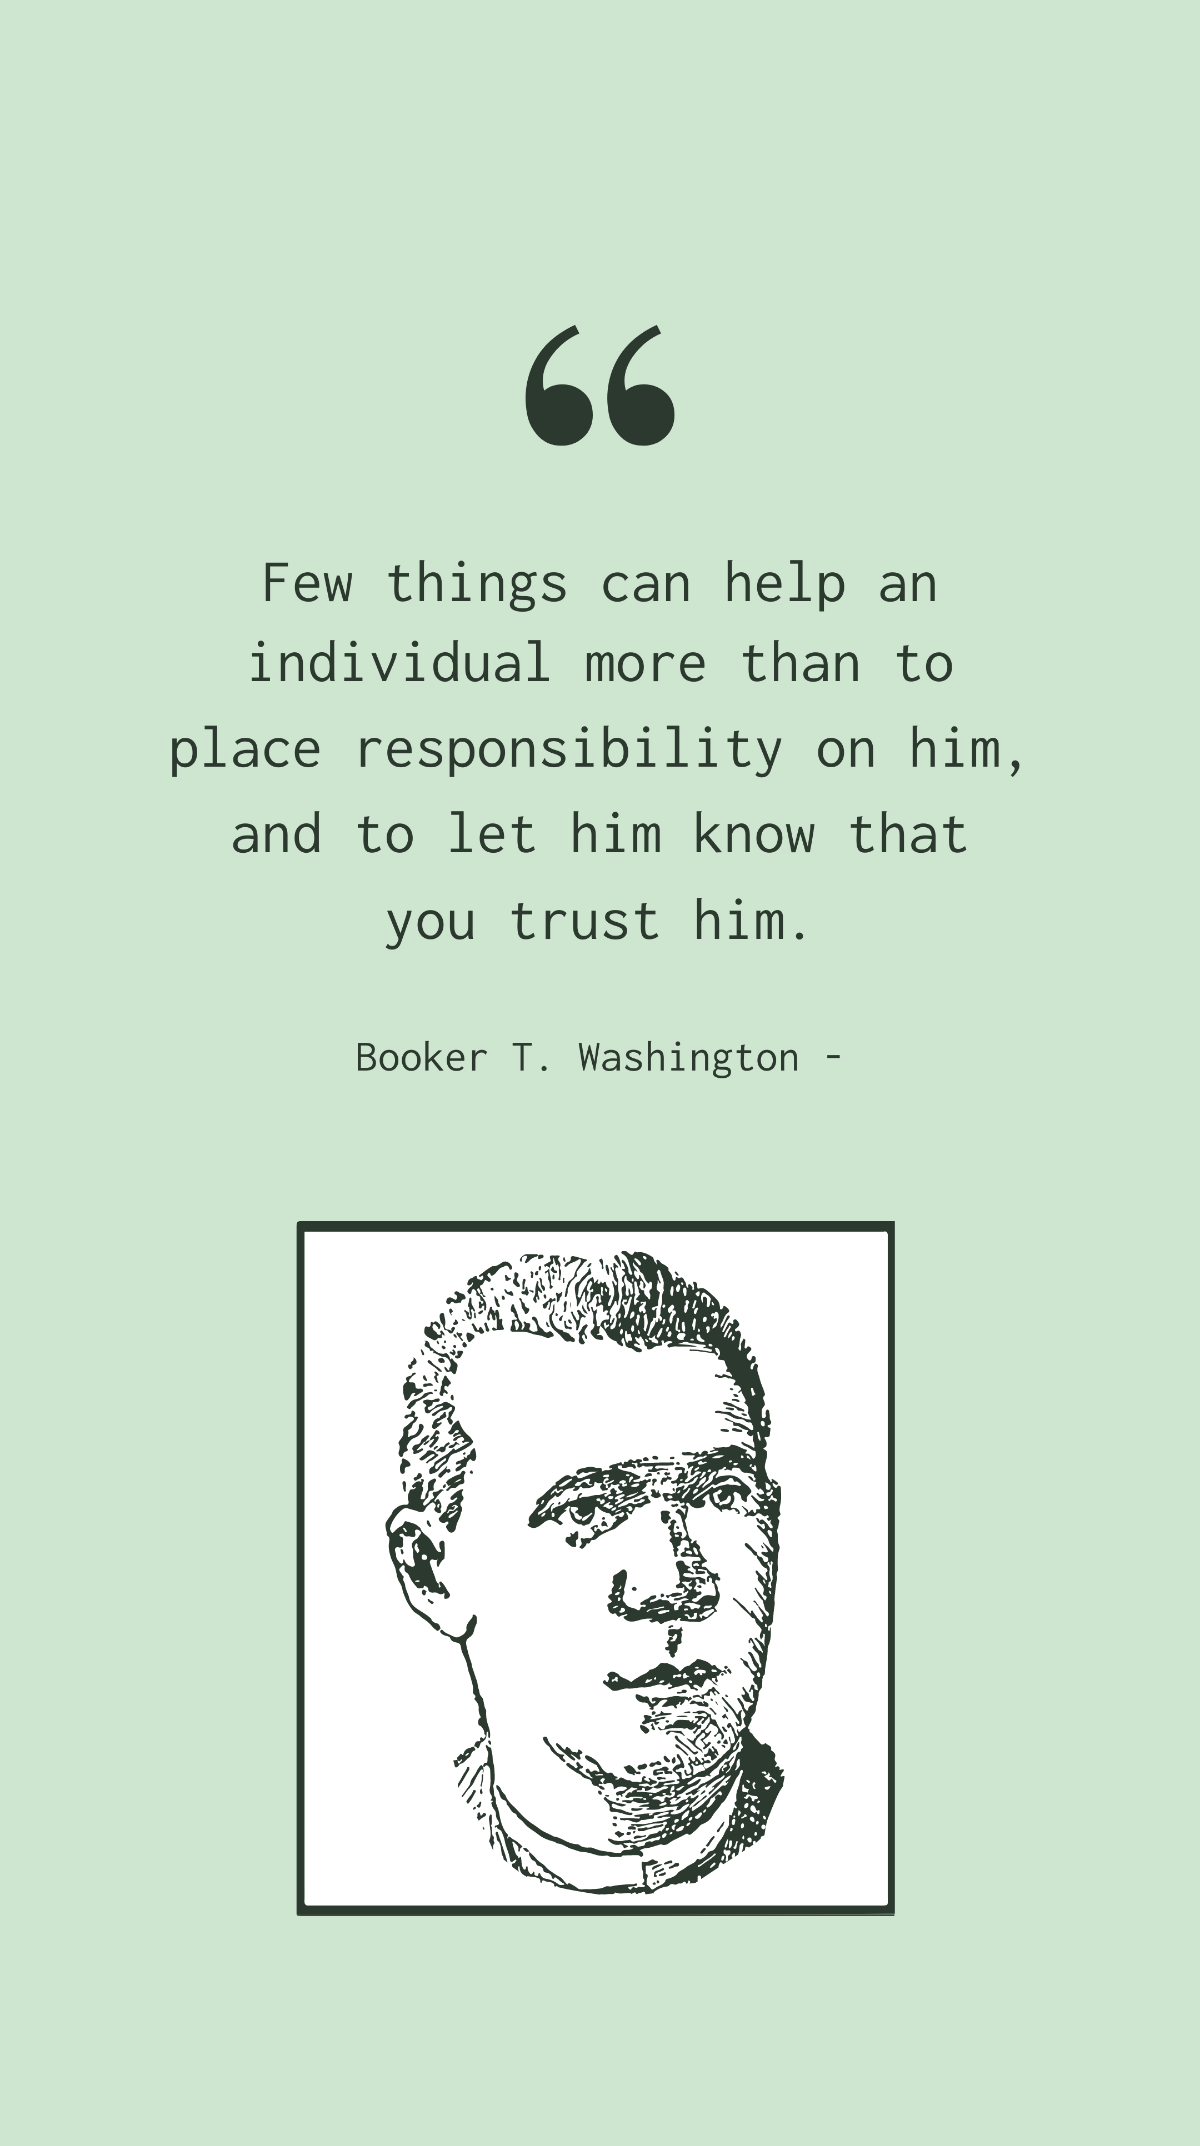 Free Booker T. Washington - Few things can help an individual more than to place responsibility on him, and to let him know that you trust him. Template